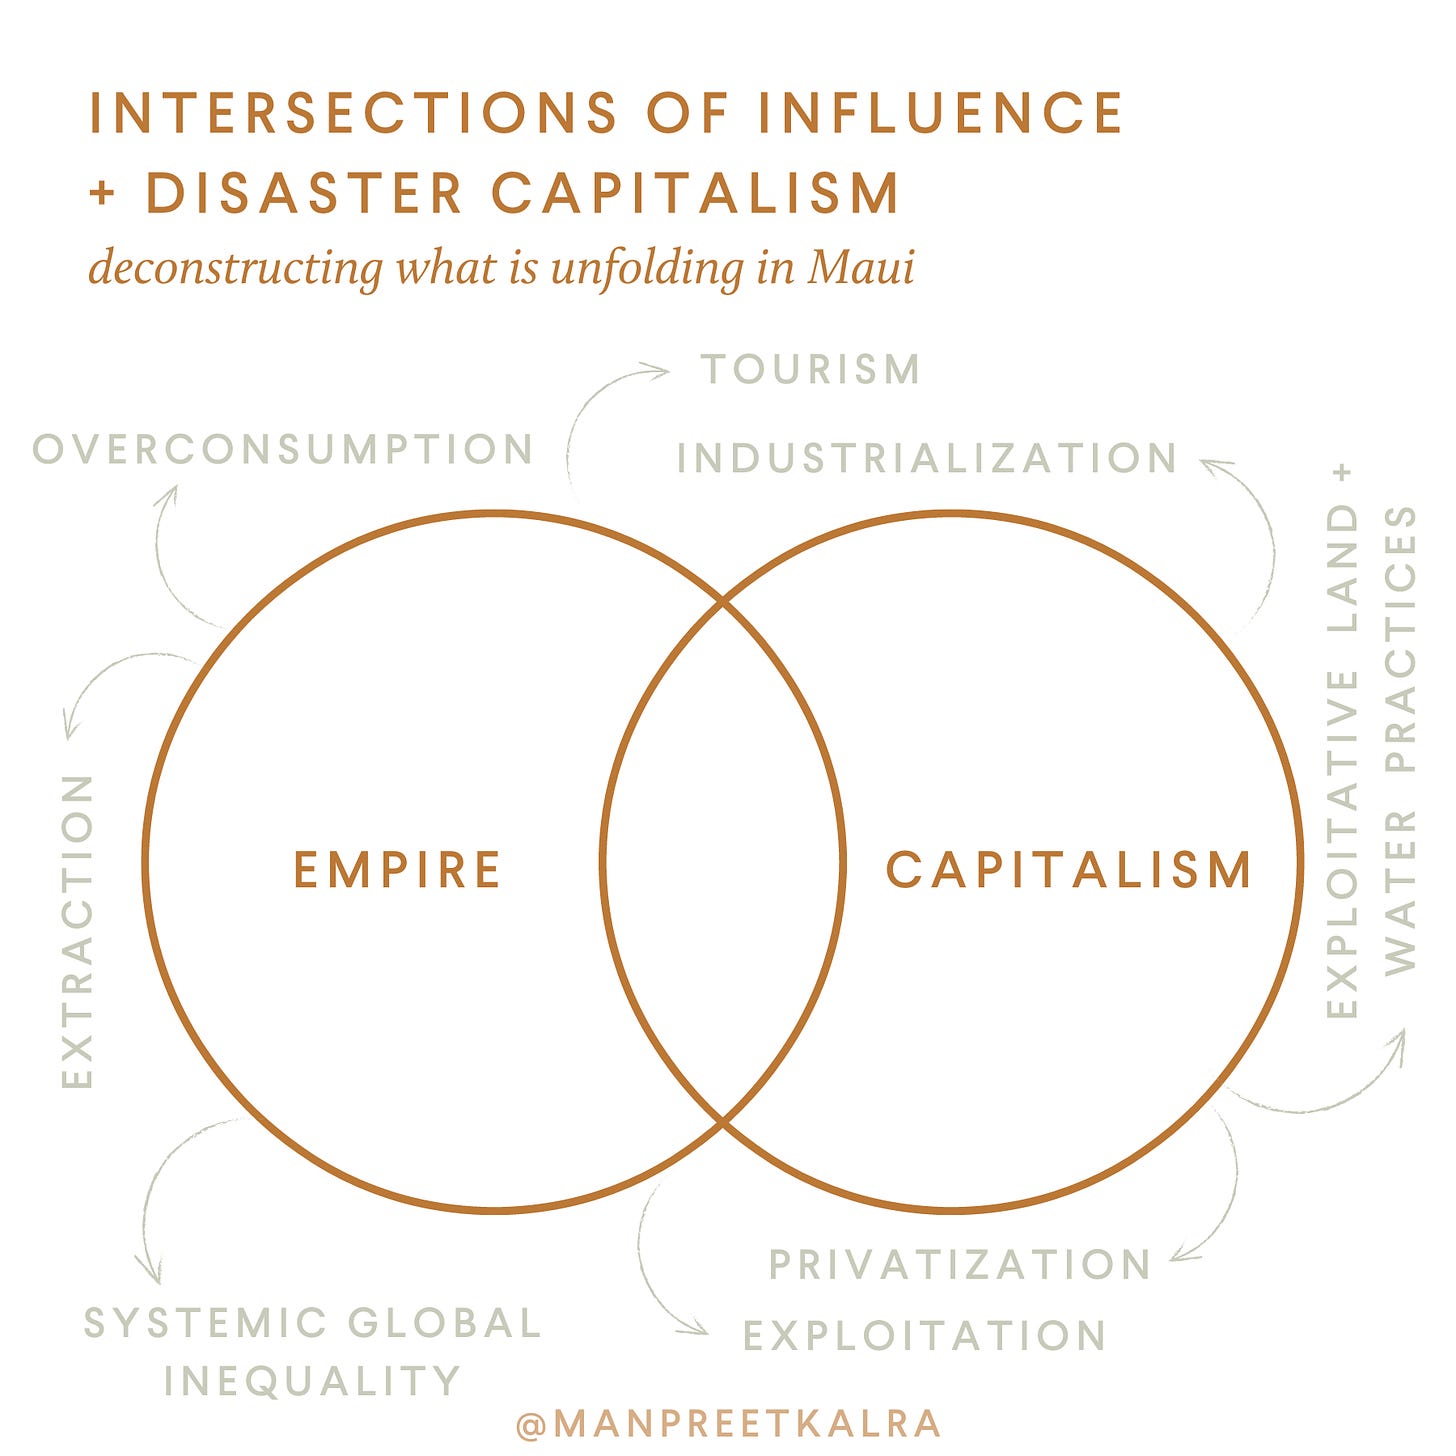 Intersections of Influence Venn Diagram by Manpreet Kalra examining Disaster Capitalism